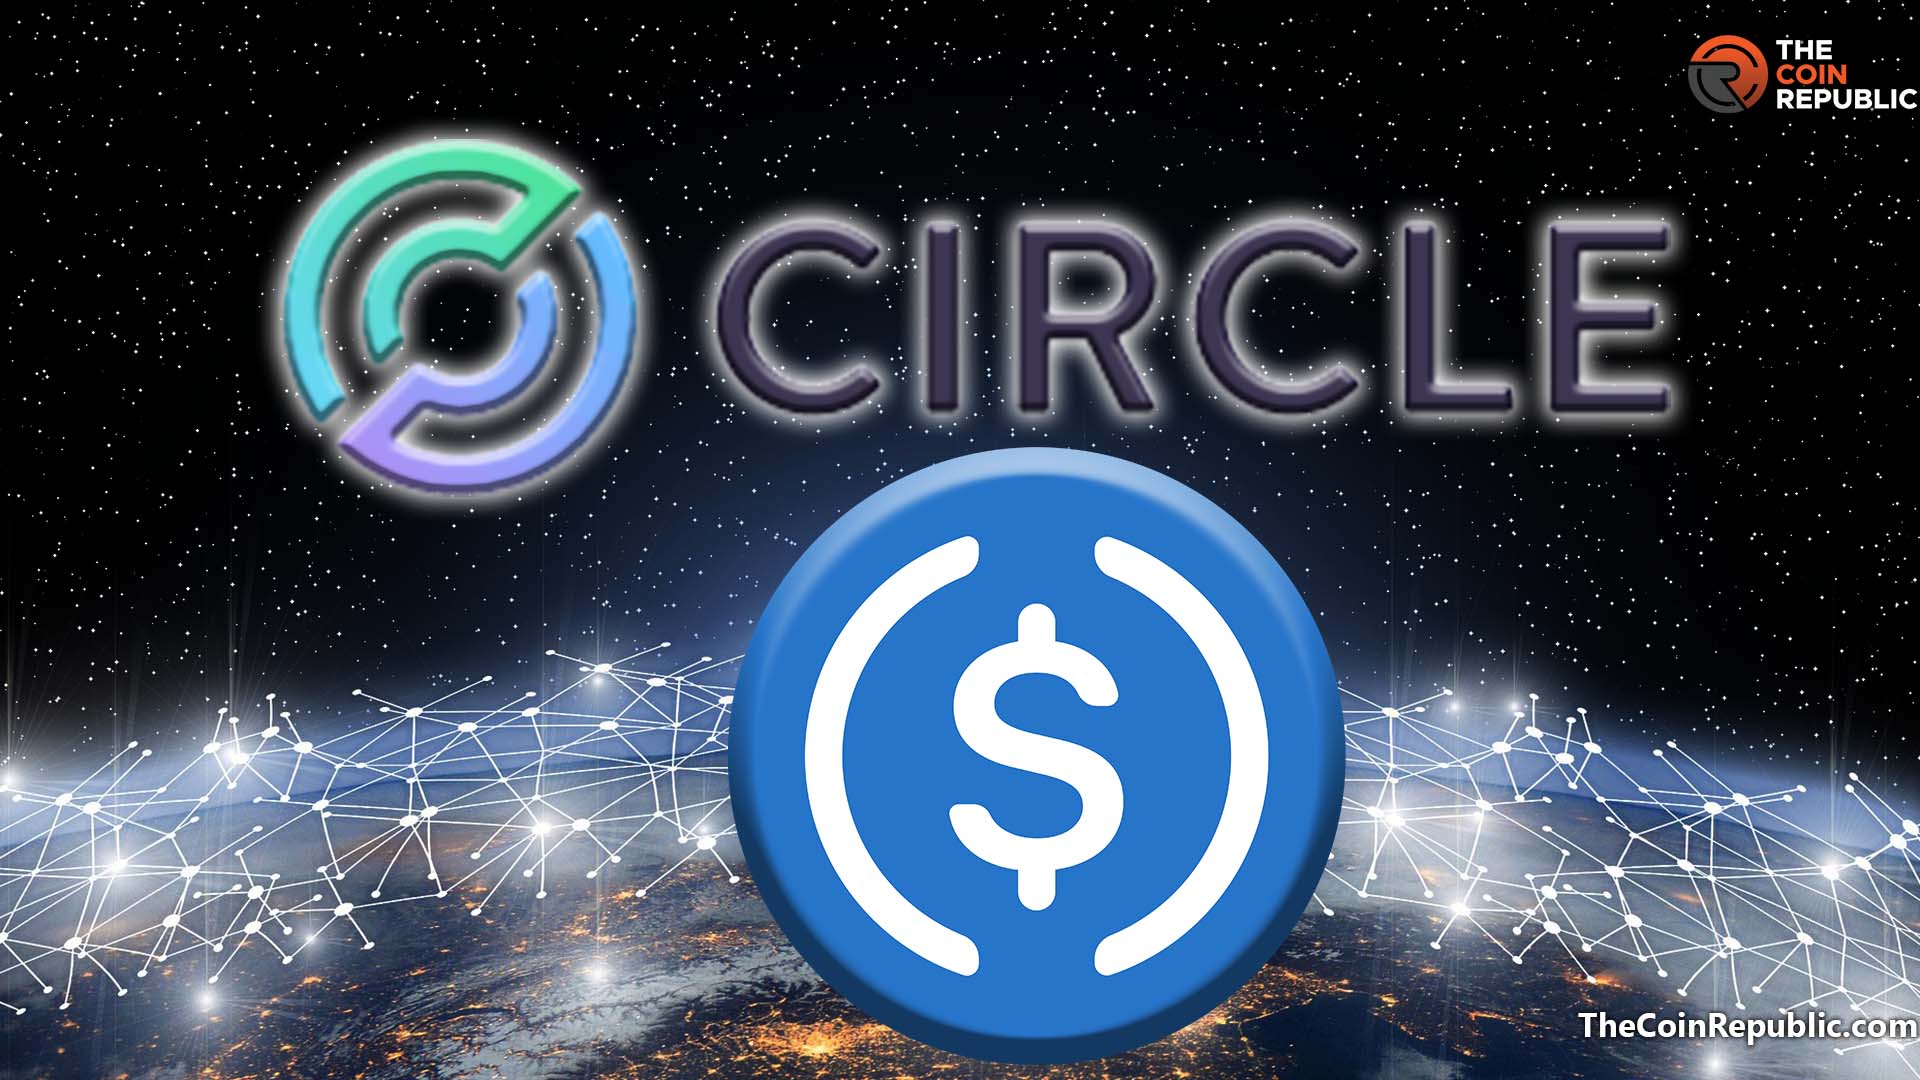 Circle Release PSA Warning and Stated “Not Fall for This”